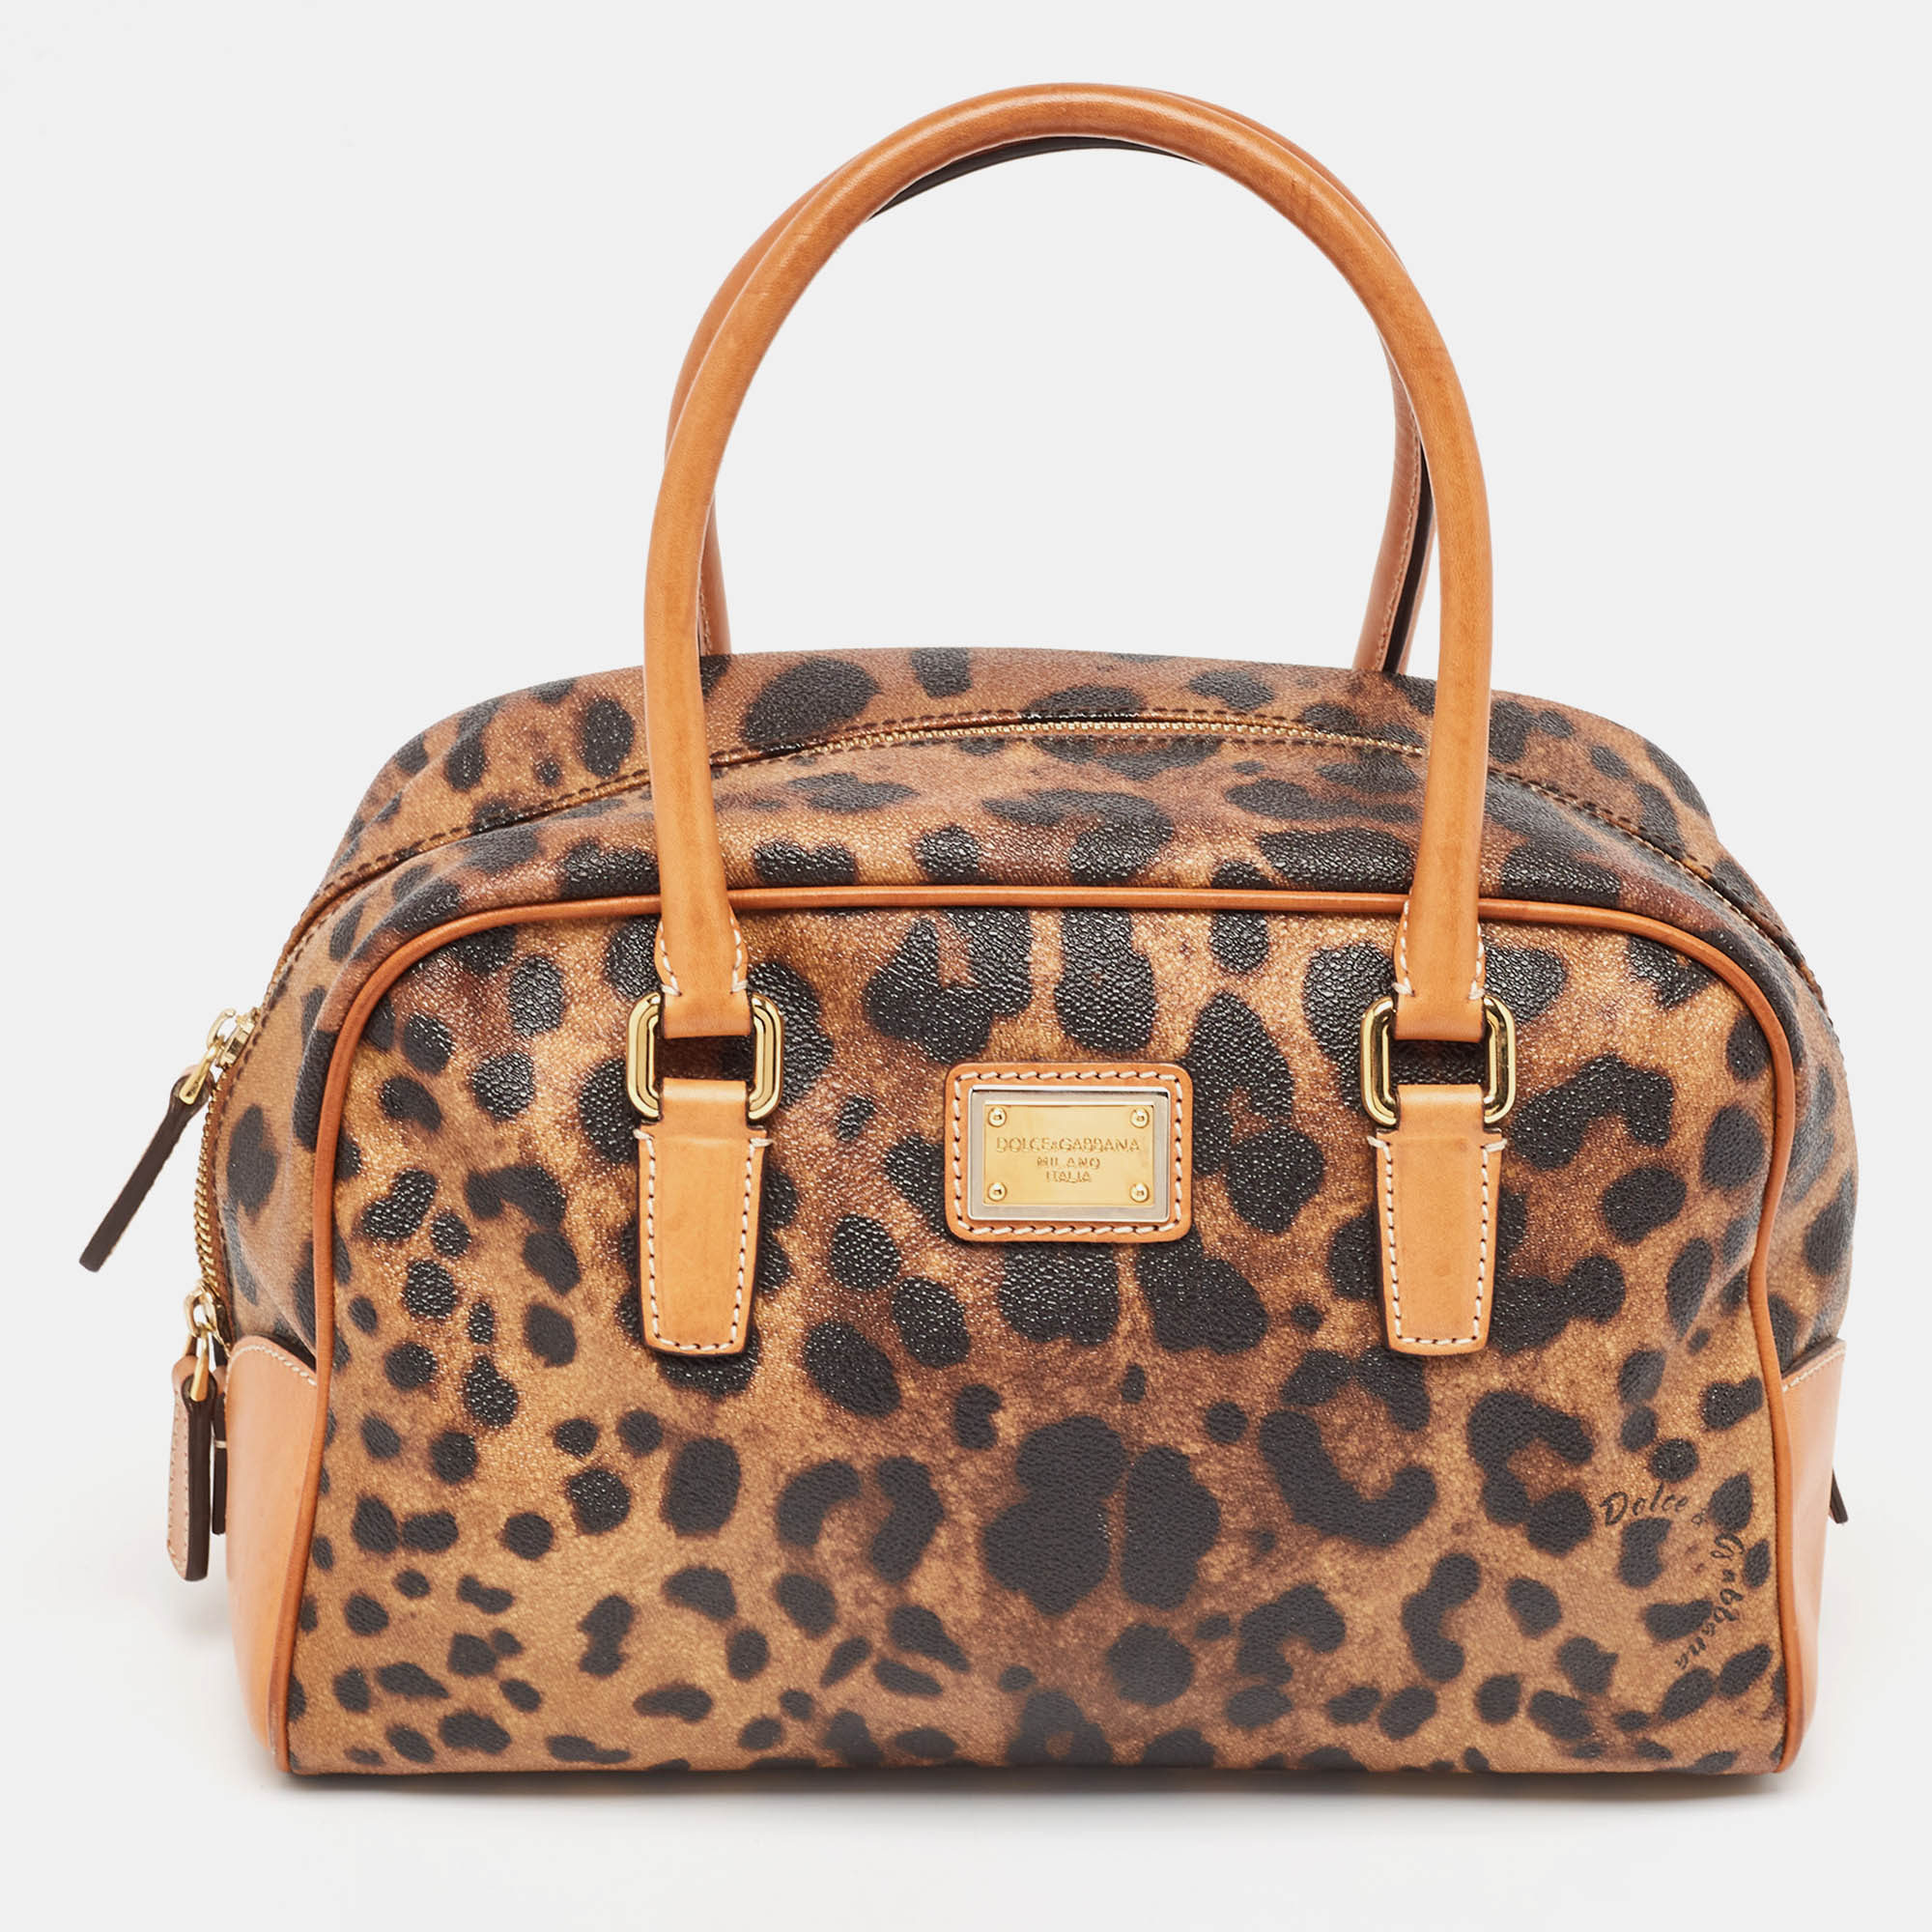 

Dolce & Gabbana Brown/Black Leopard Print Coated Canvas and Leather Satchel